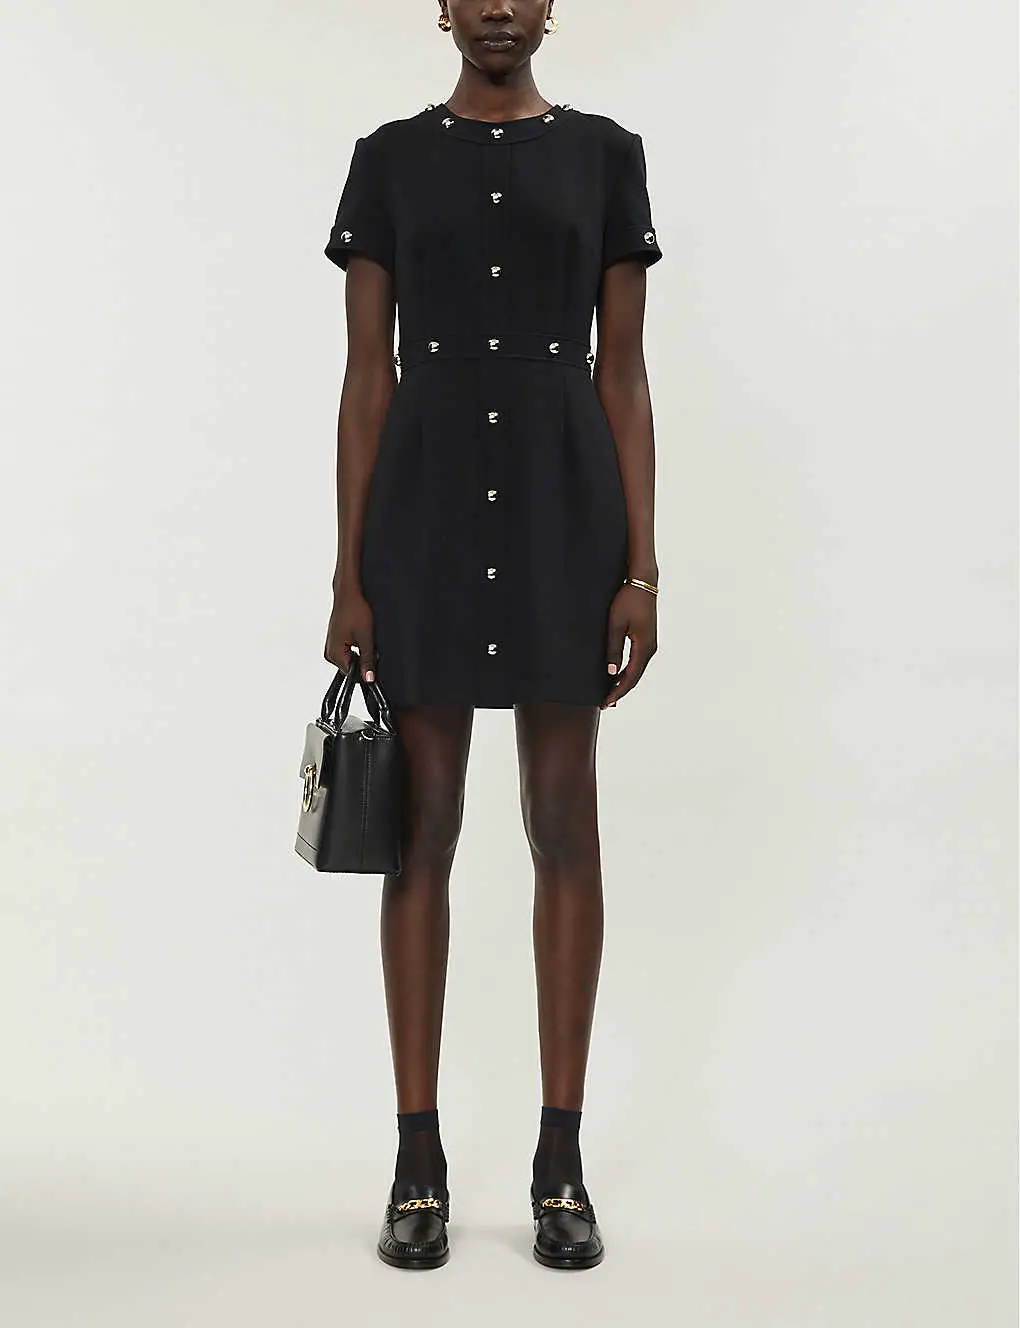 French Fashion Clothing Brand Claudie Pierlot French Dress Parisian Style Paris Chic Style